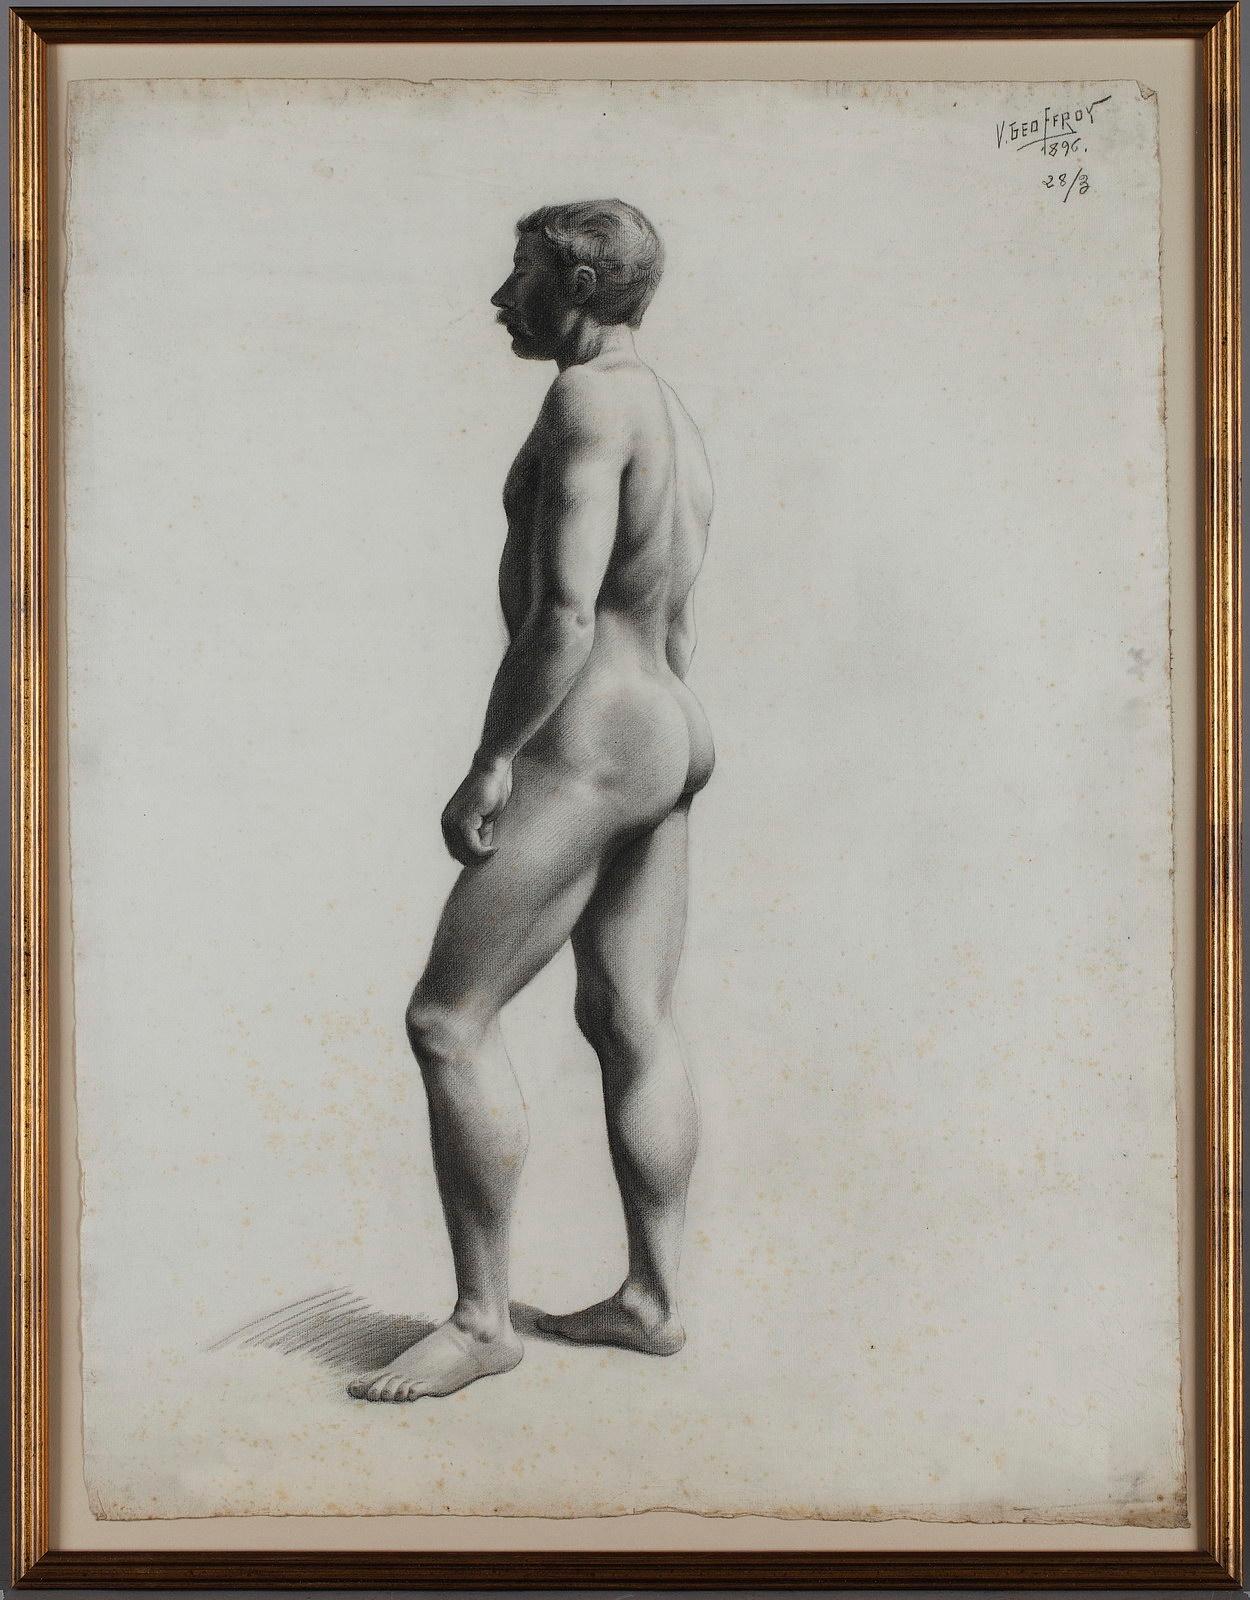 Four male nude drawings from life by V. Geoffray in the late 19th century. These academic drawings of the nude, called académies, were the basic building block of academic education, as it was practiced in France in the 19th century. They were